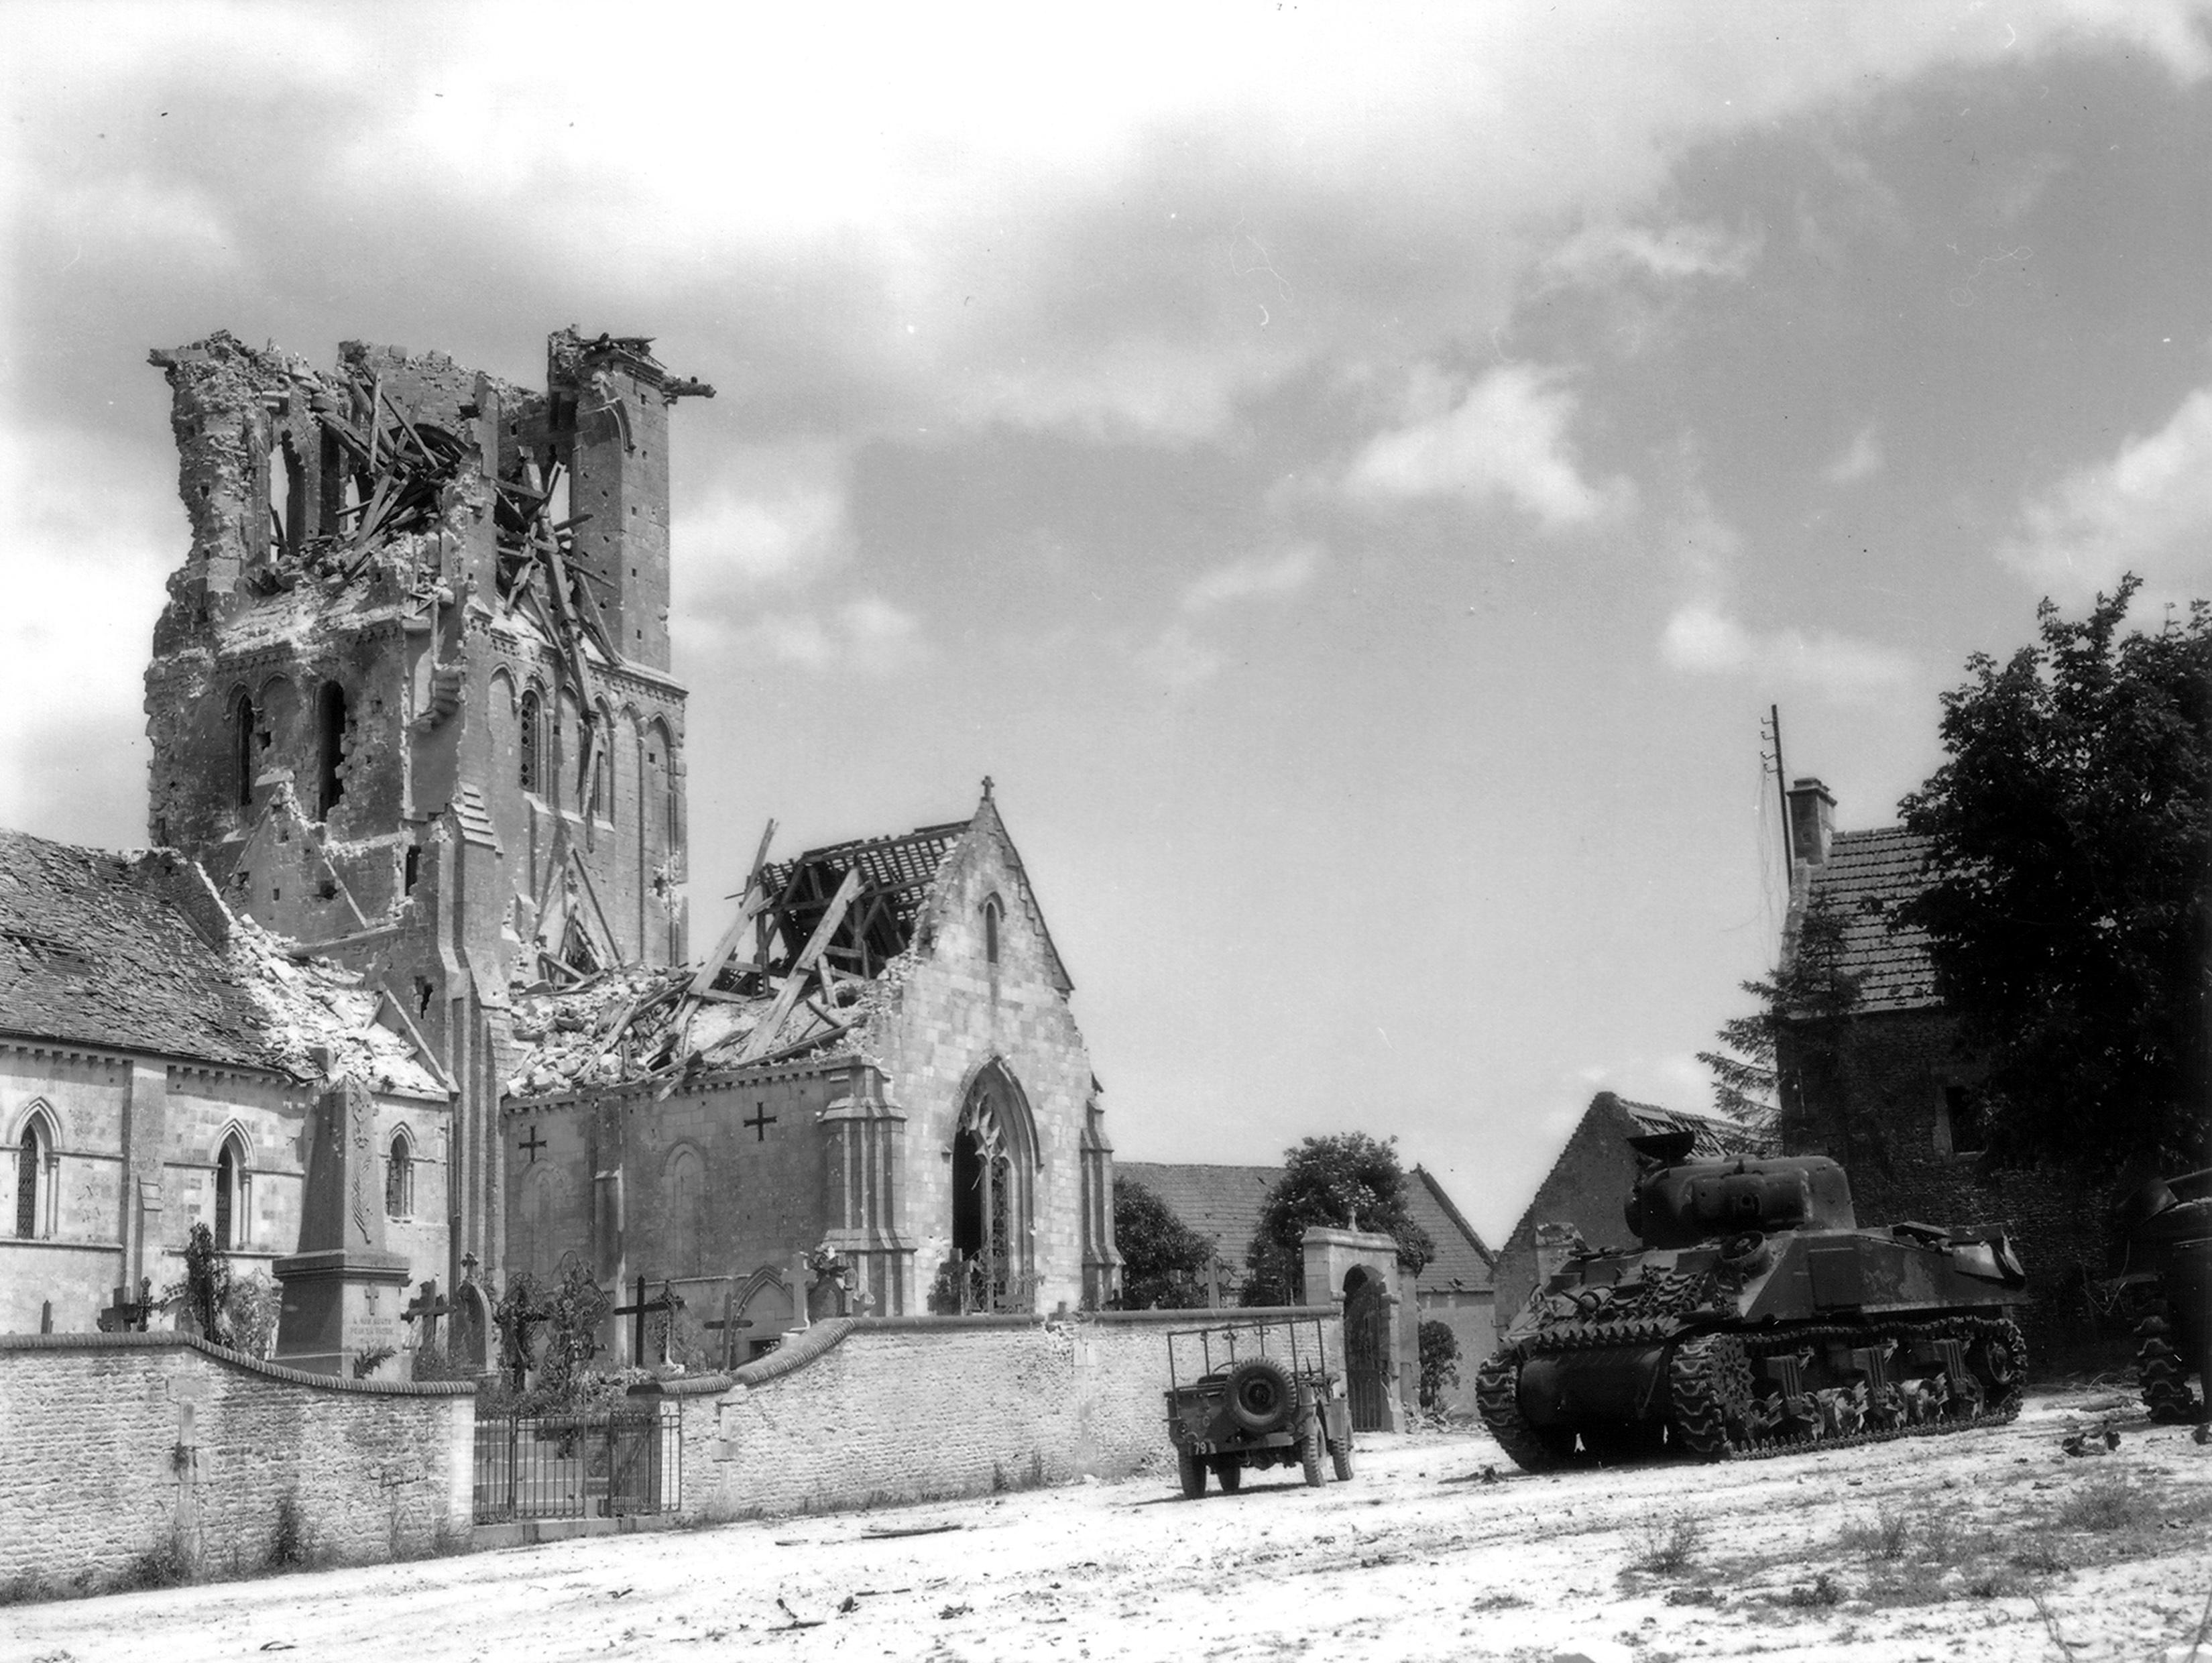 Two disabled M4 Sherman tanks and a litter Jeep near the heavily damaged Église Saint-Ouen in Rots, France (near Caen), Jun 11, 1944.